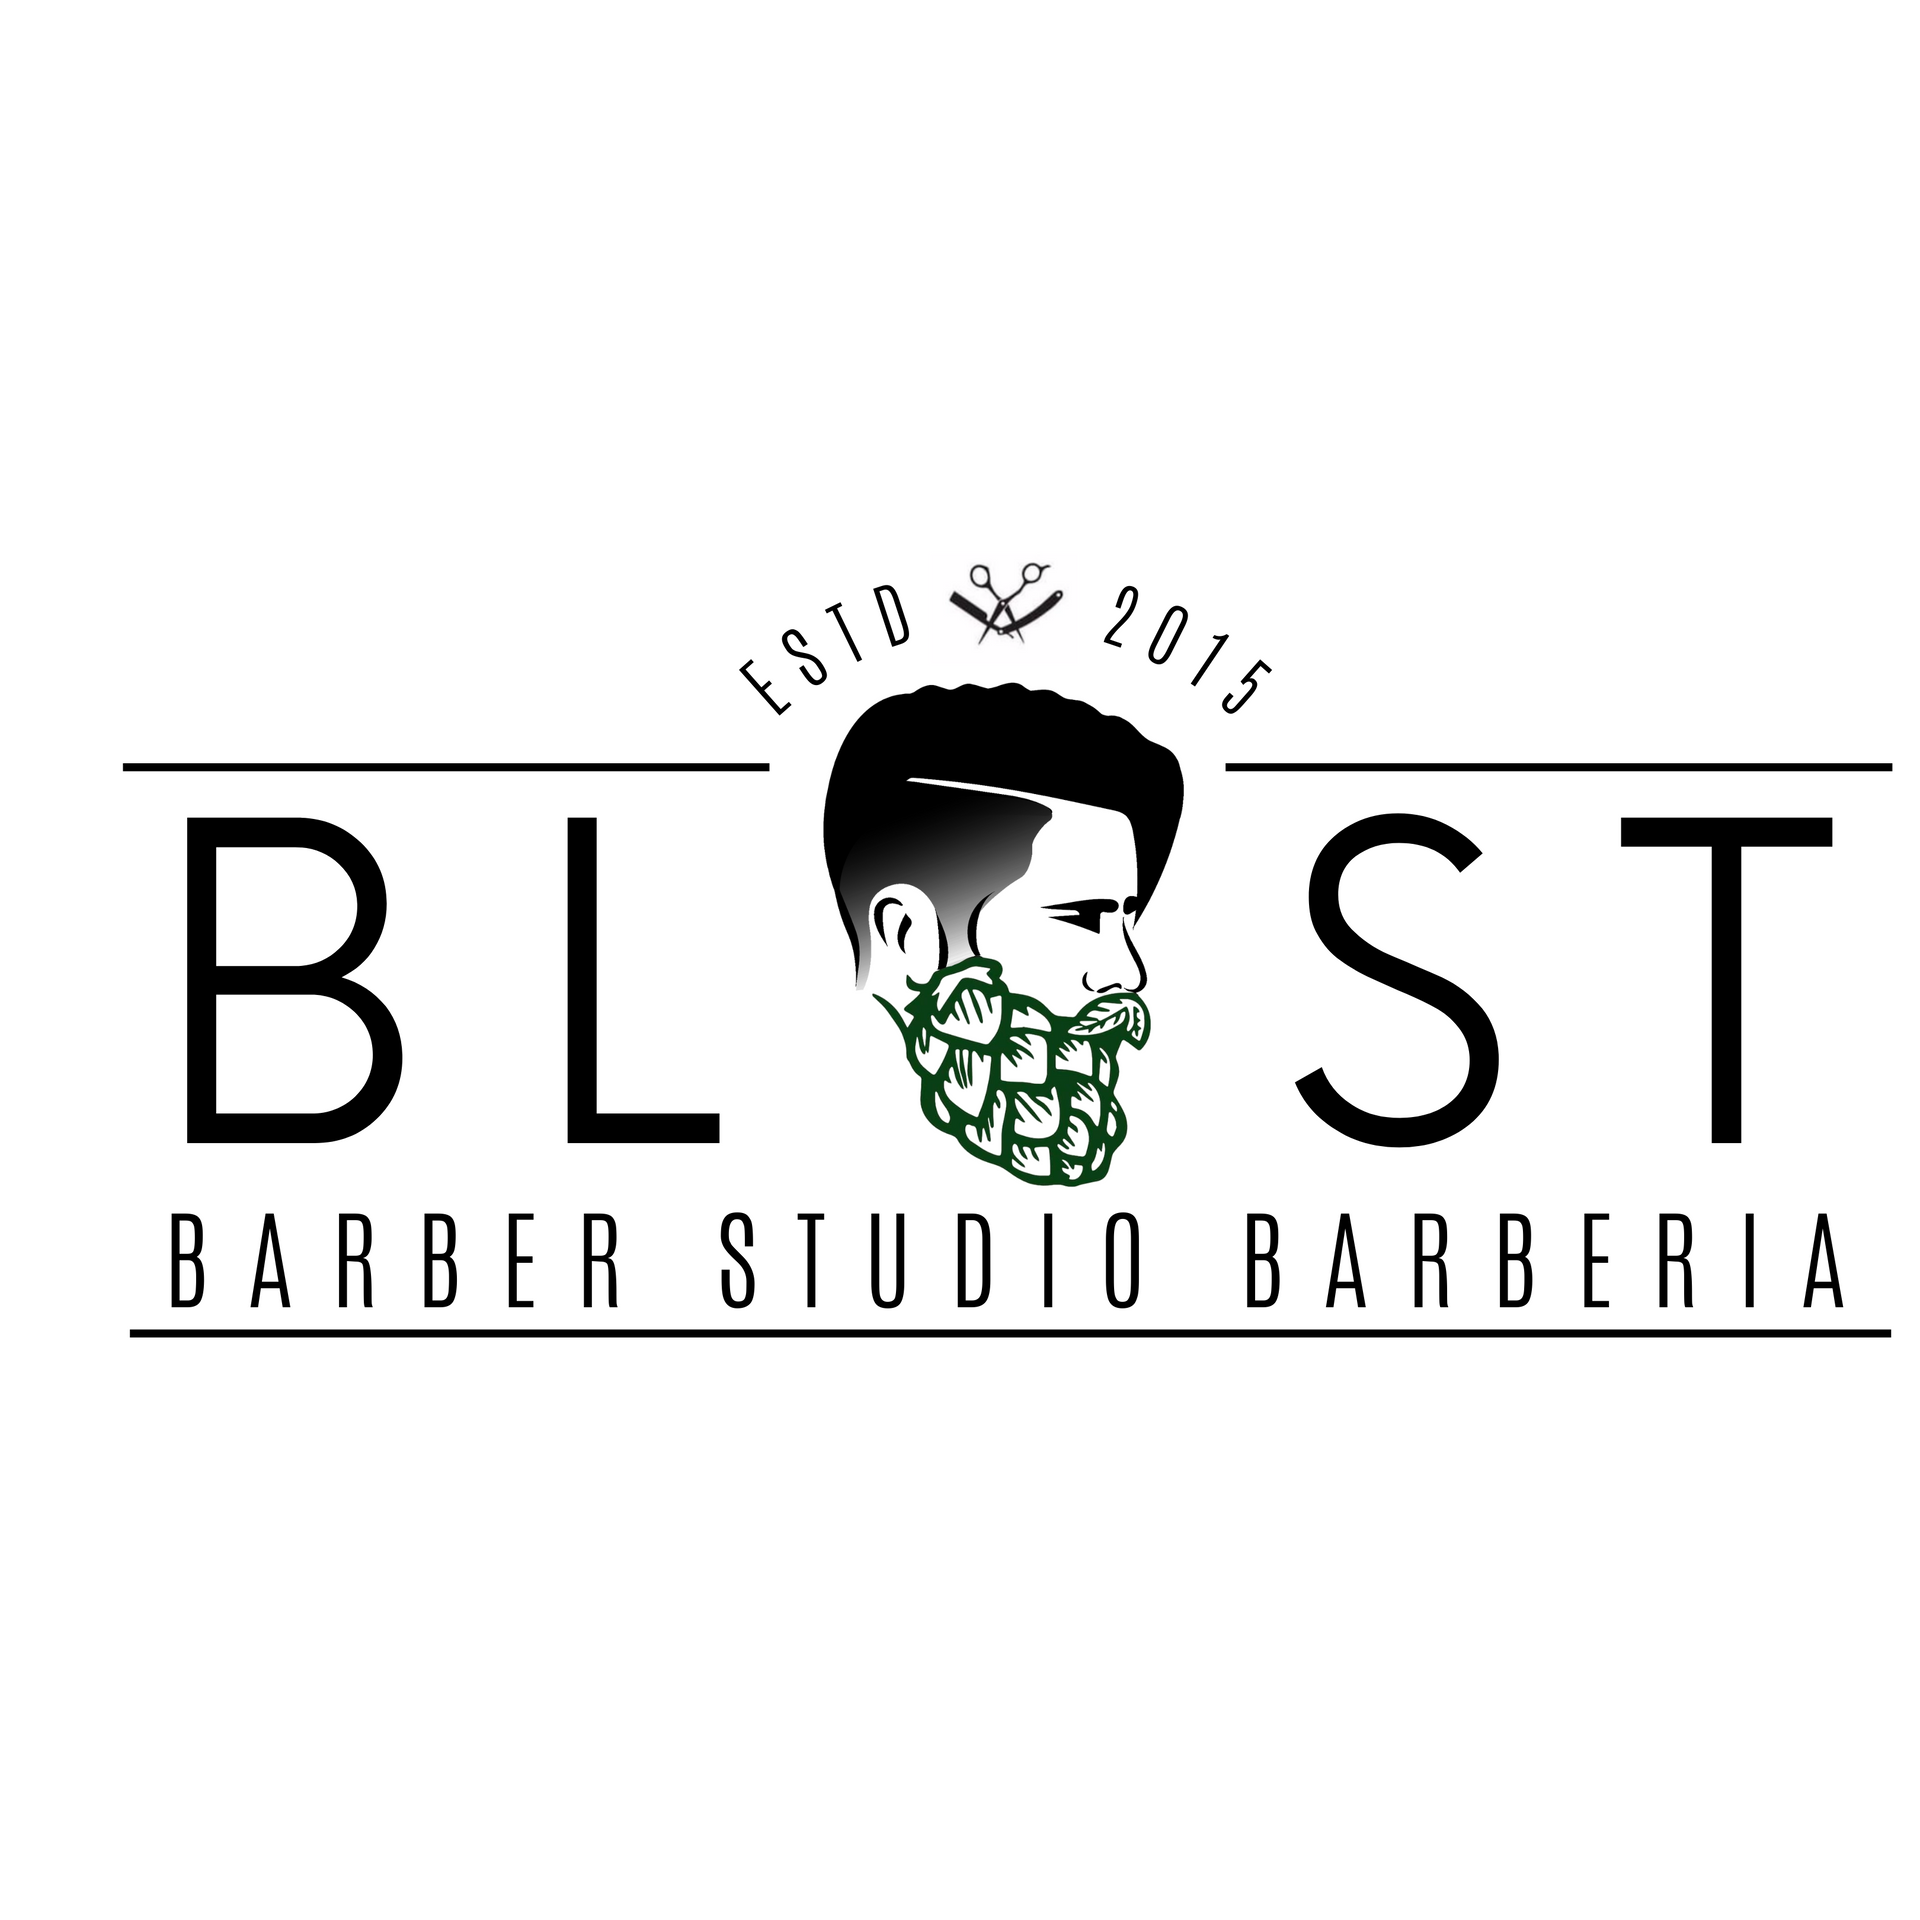 It is a logo for a barber shop.